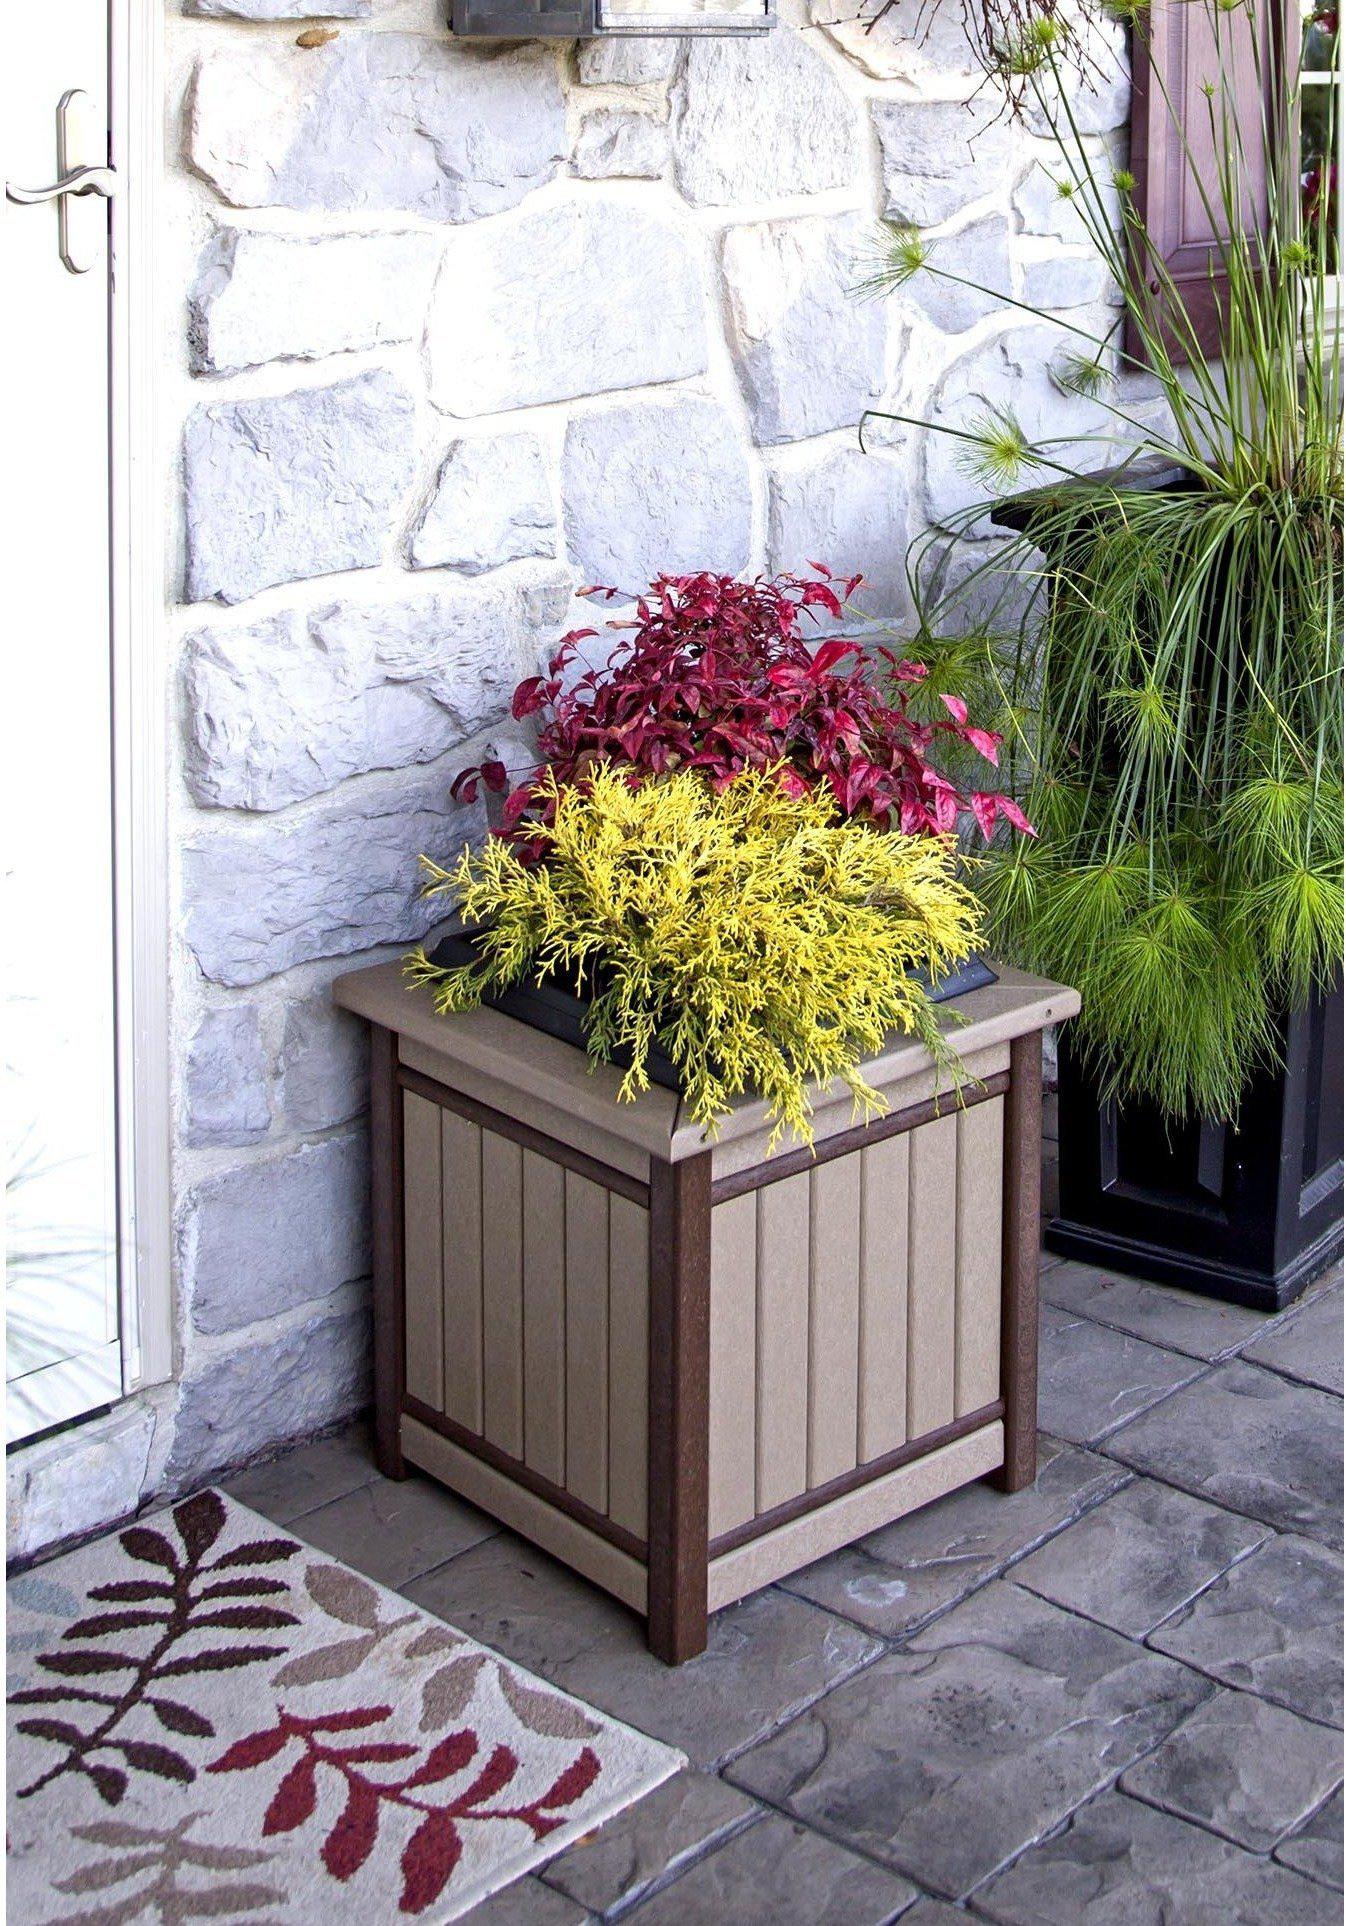 Leisure Lawns Amish Made Recycled Plastic 18" Planter Model #960 - LEAD TIME TO SHIP 4 WEEKS OR LESS